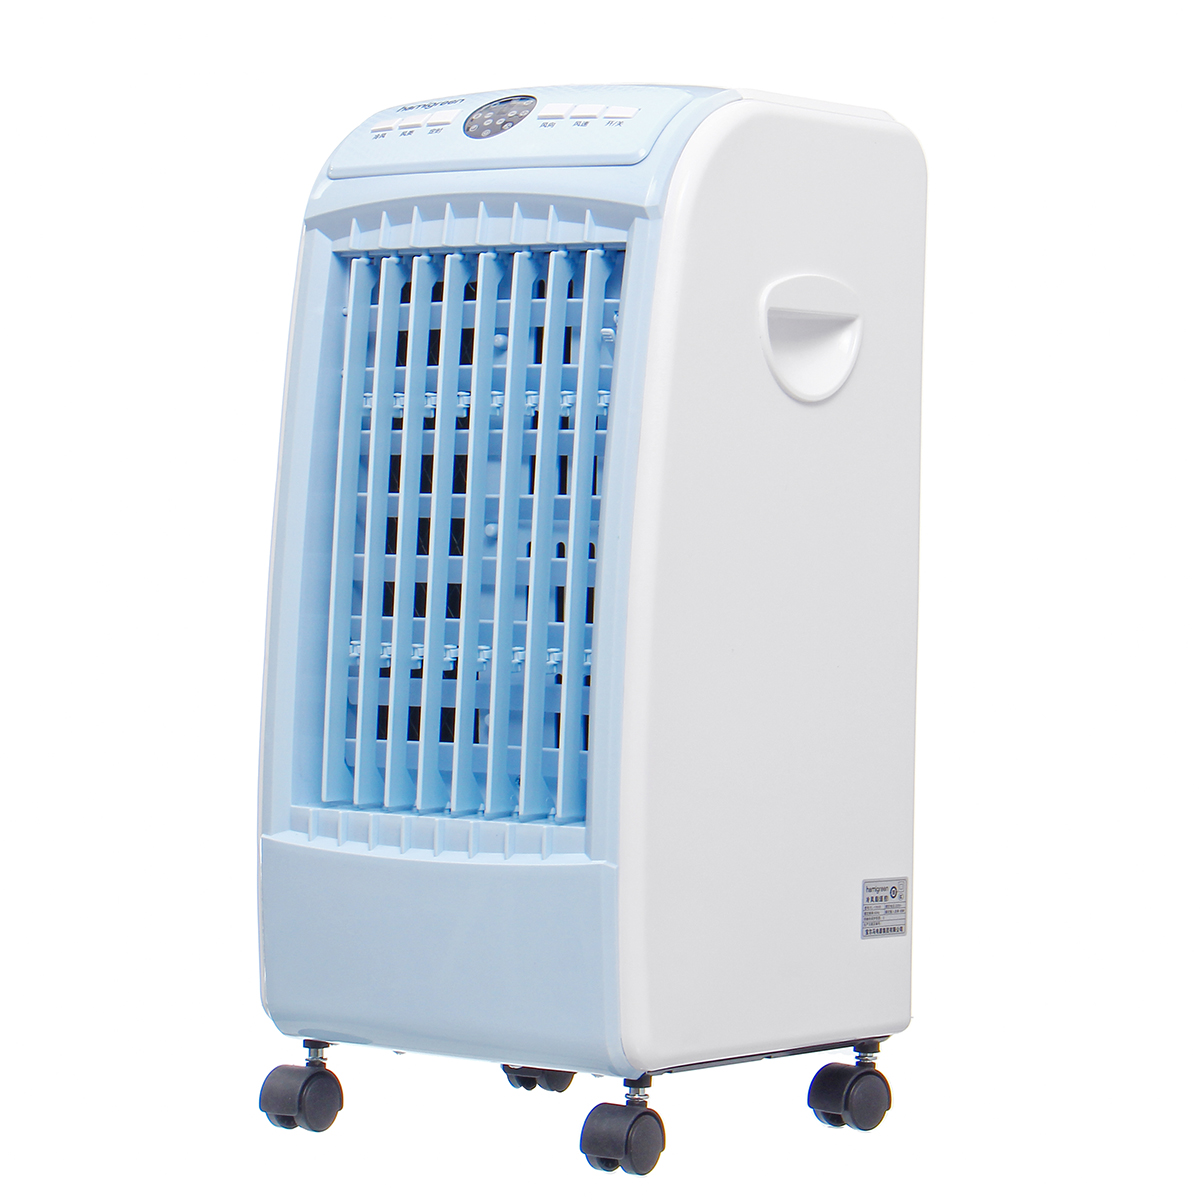 

220V 65W 3-Speeds Air Conditioner Cooler Air Cooling Fan Purifier Humidifier Remote Control